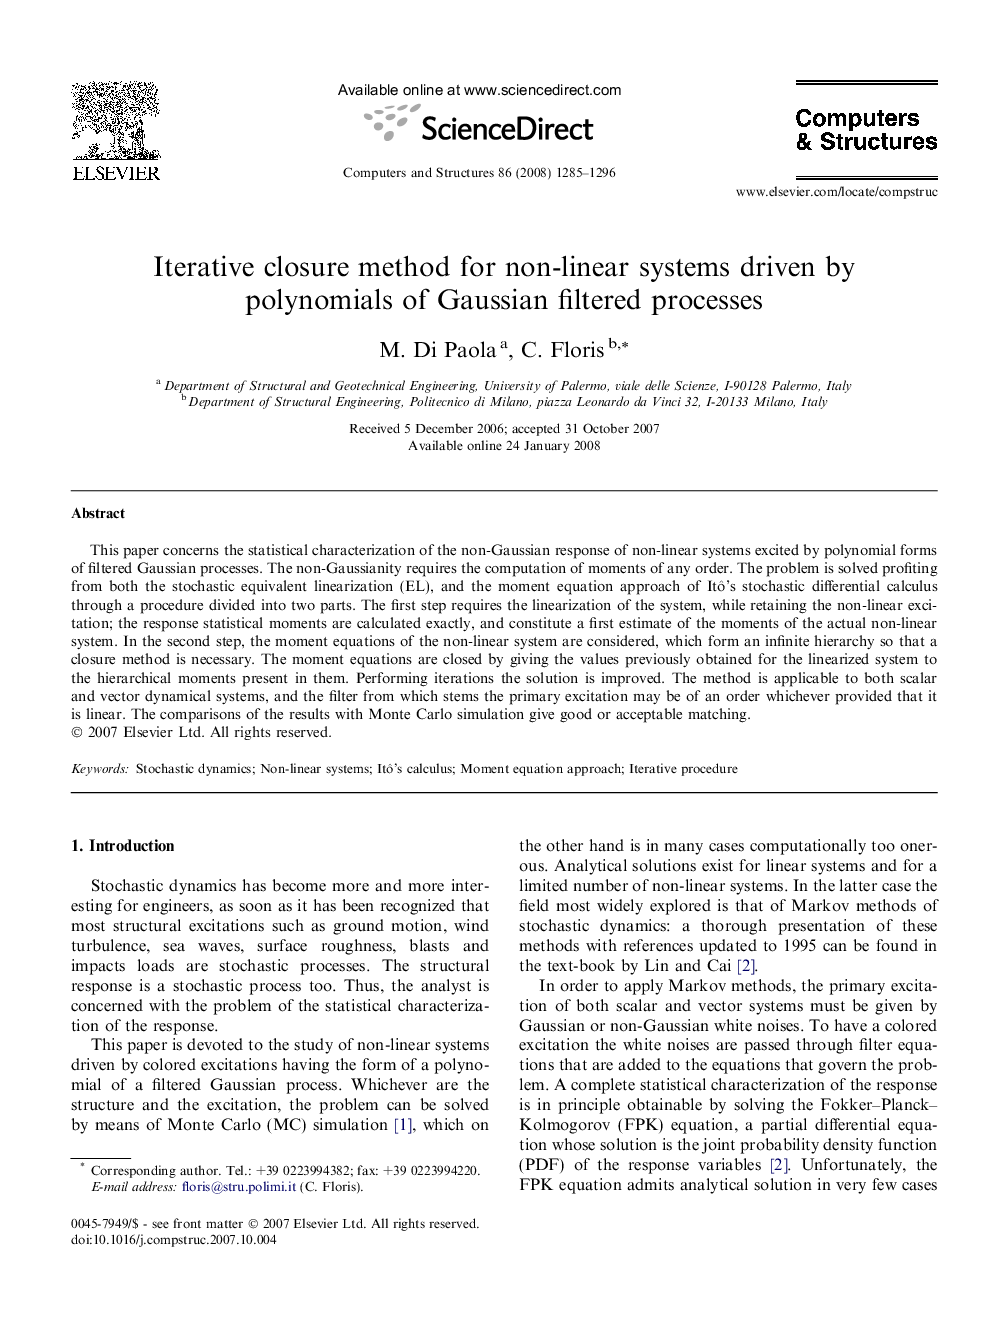 Iterative closure method for non-linear systems driven by polynomials of Gaussian filtered processes